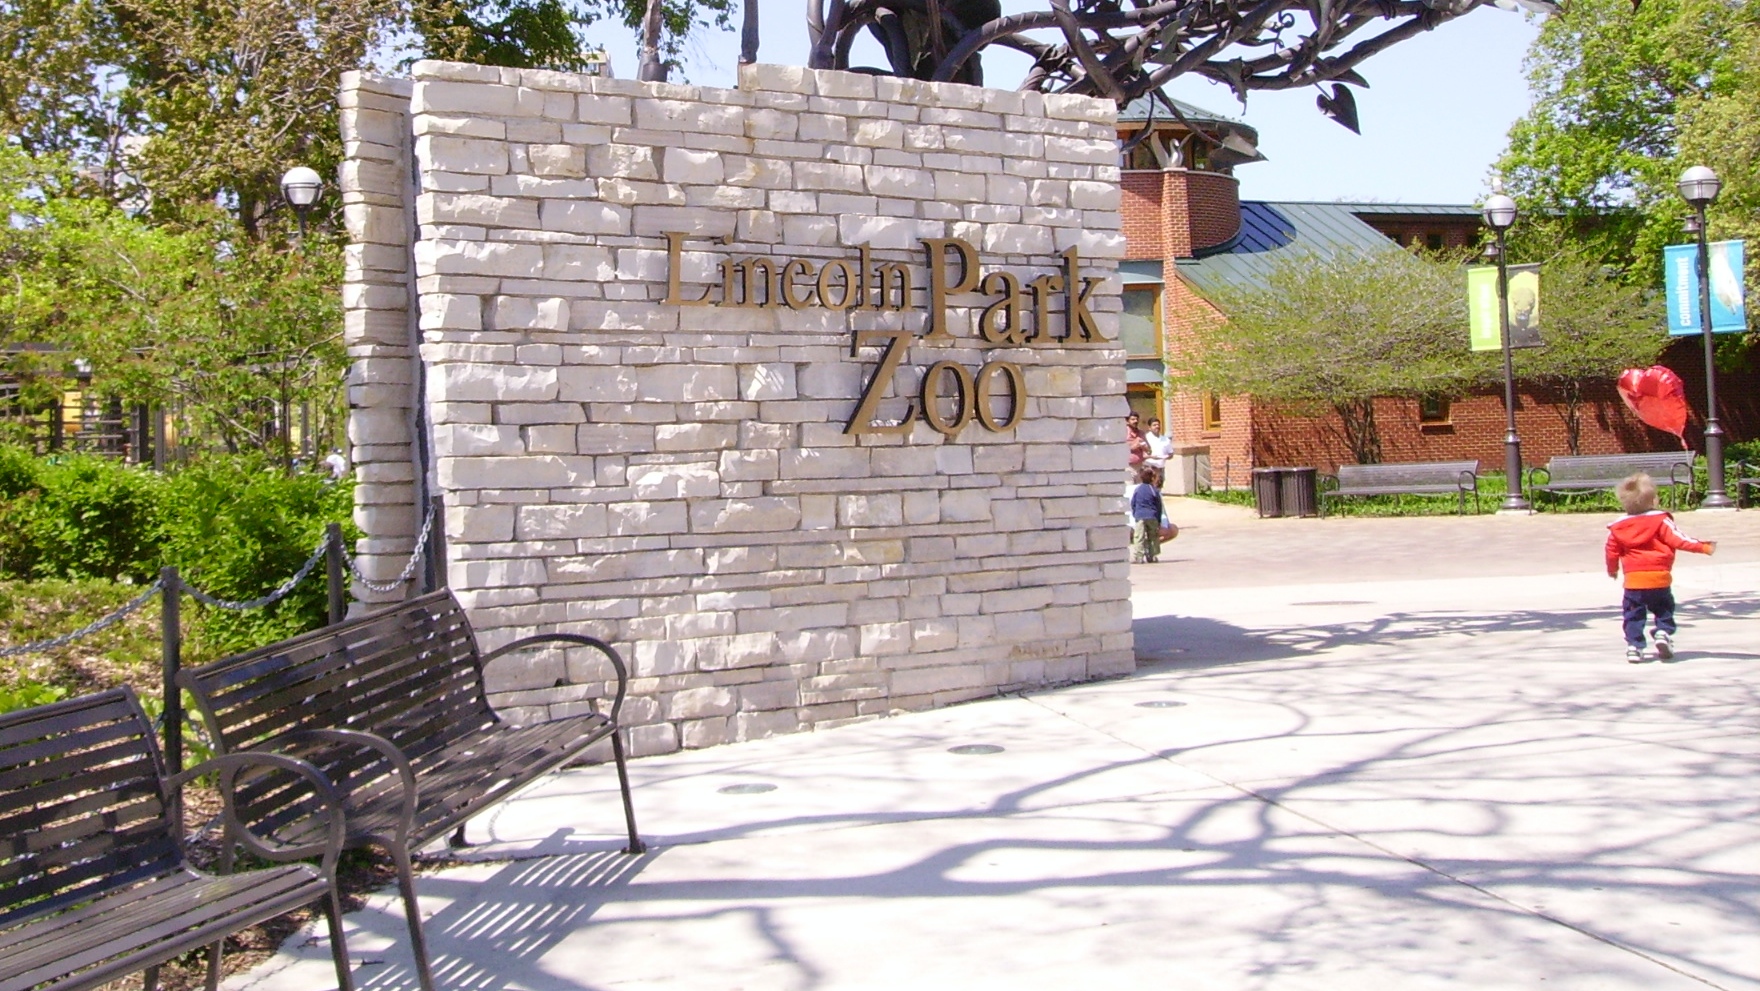 Lincoln Park Zoo - Simple English Wikipedia, the free encyclopedia